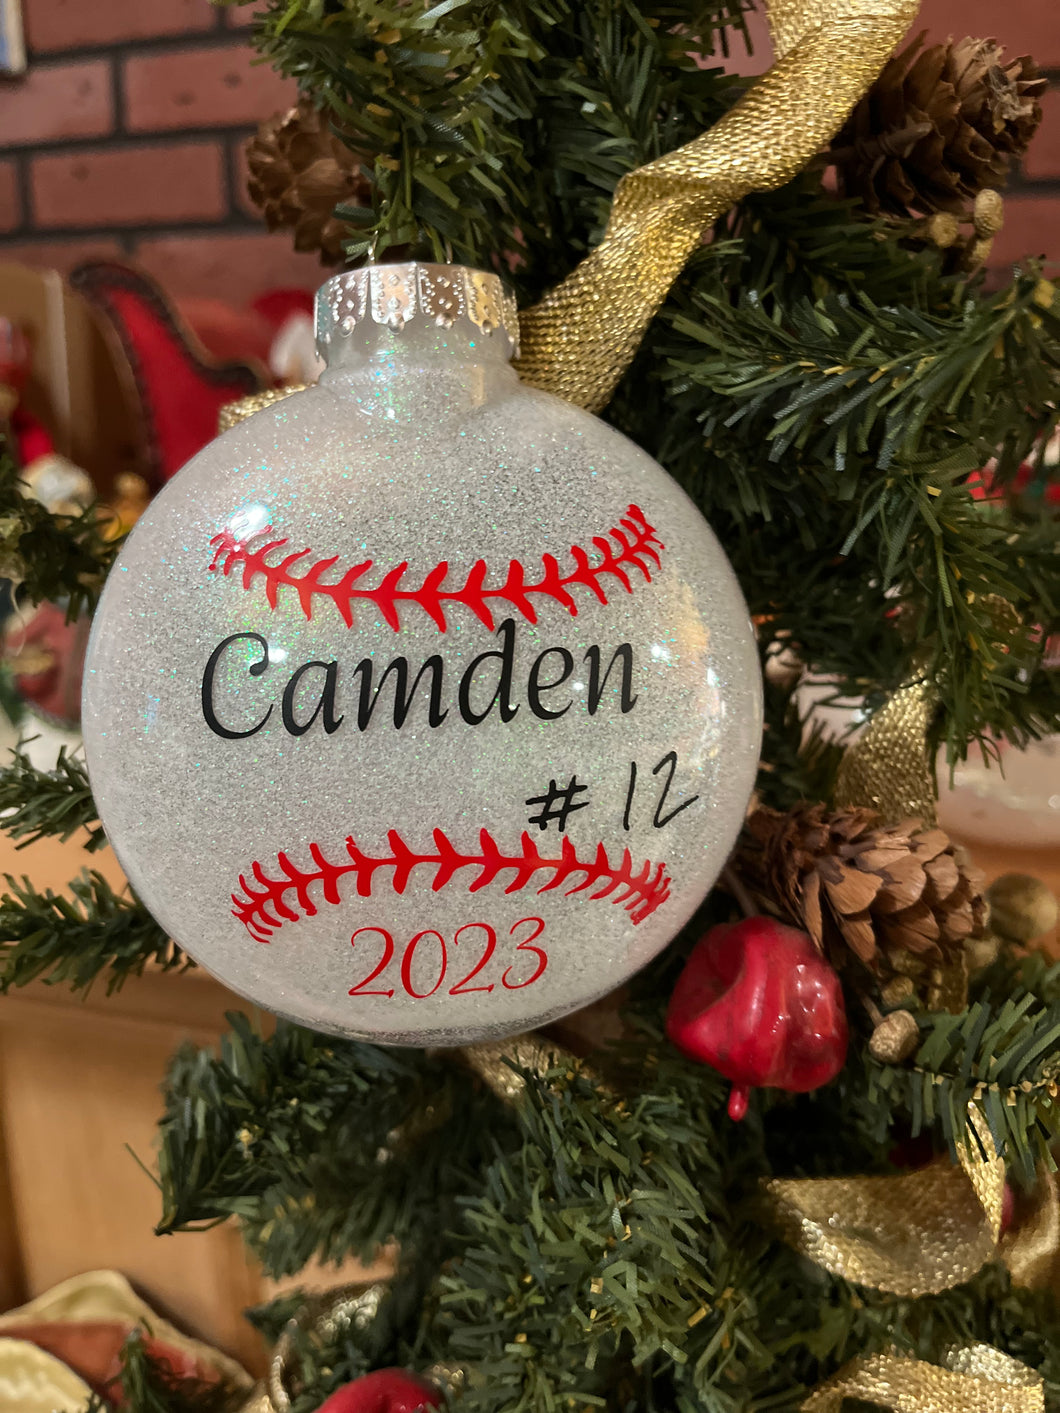 Softball gifts for boys, Softball gifts for kids, Softball gifts for players, Softball gifts ideas for girls, Sport gift ideas for team